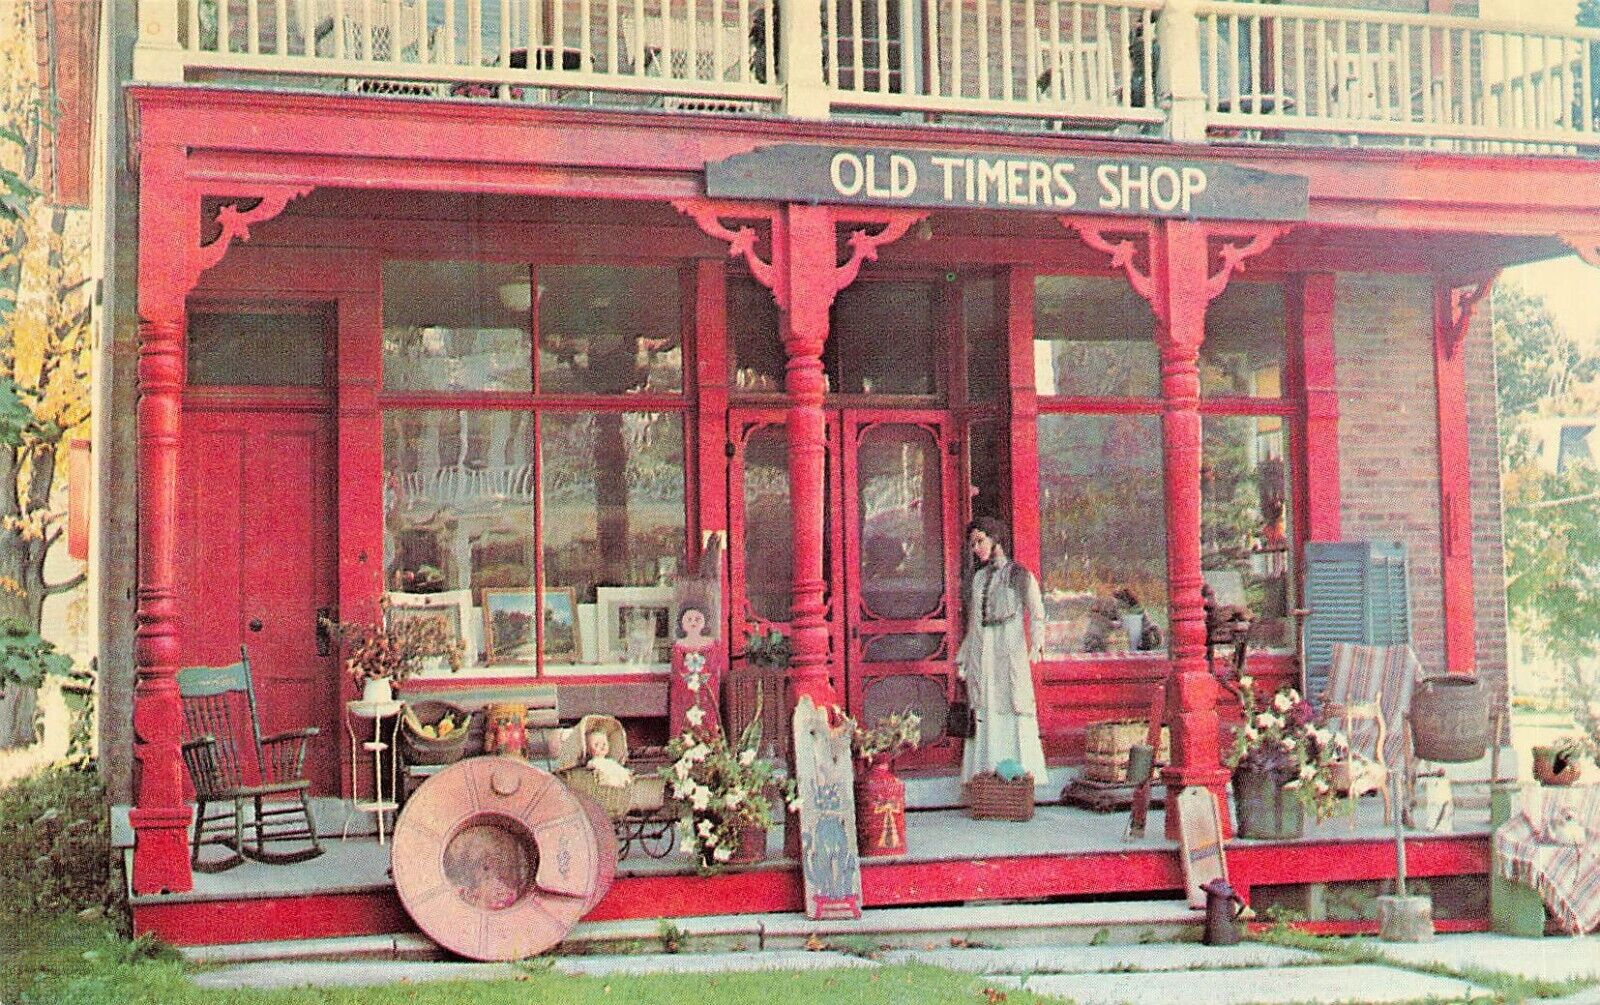 NEW YORK POSTCARD: VIEW OF UNIQUE ITEMS AT THEOLD TIMERS SHOP, CHERRY VALLEY, NY